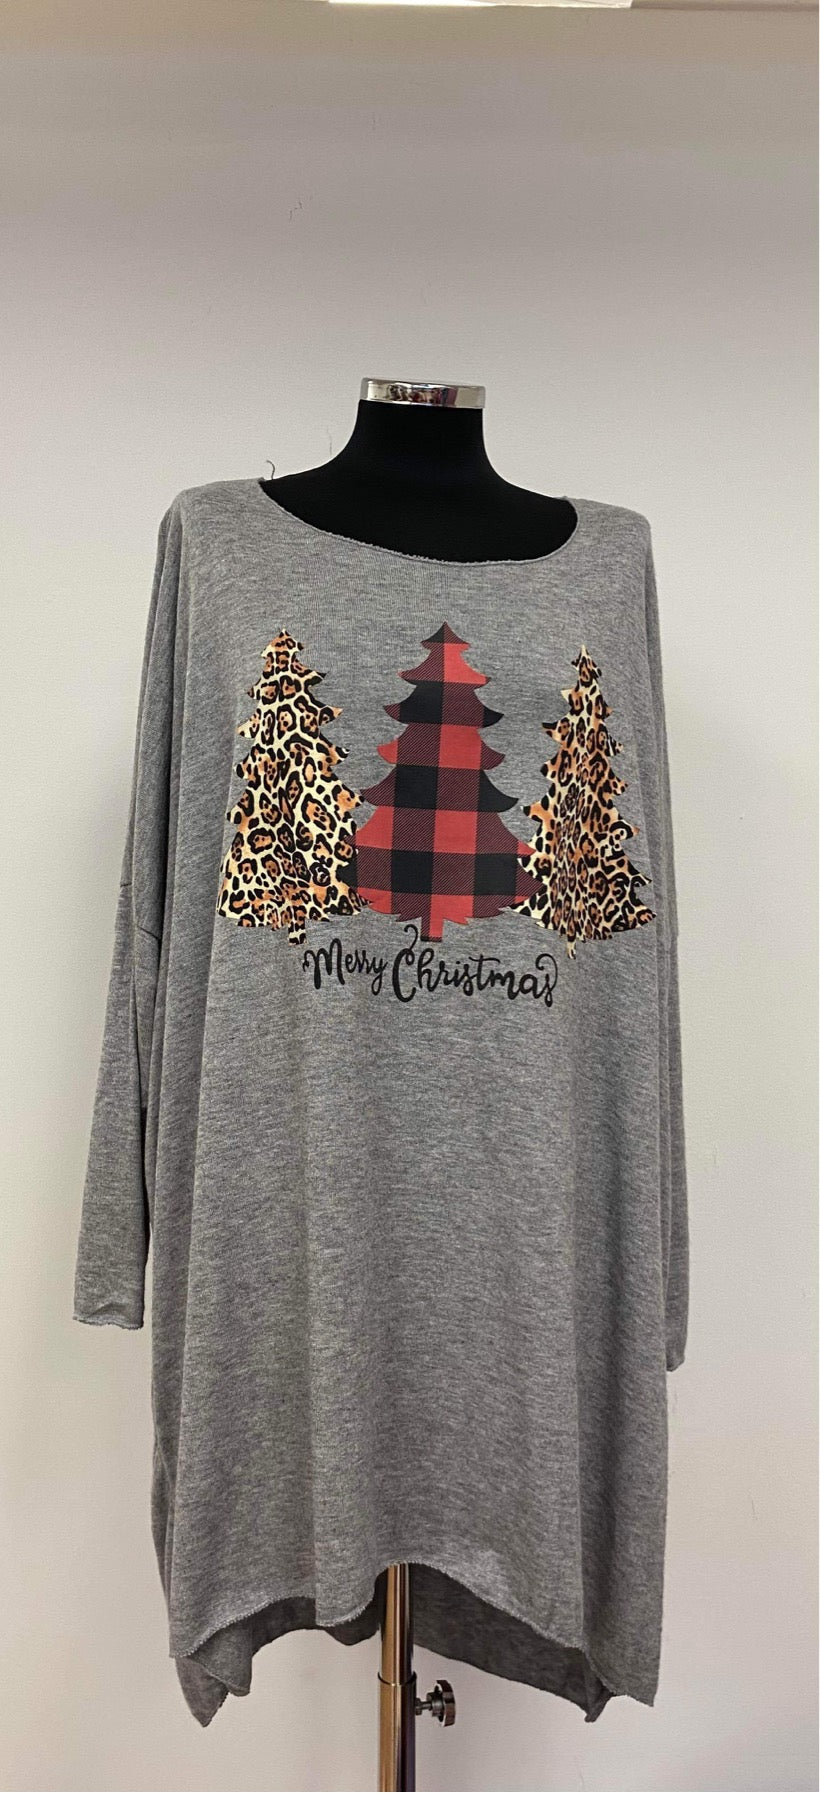 Plus Size Fine Knit Longline Christmas Top with Christmas Tree Design (16-22)